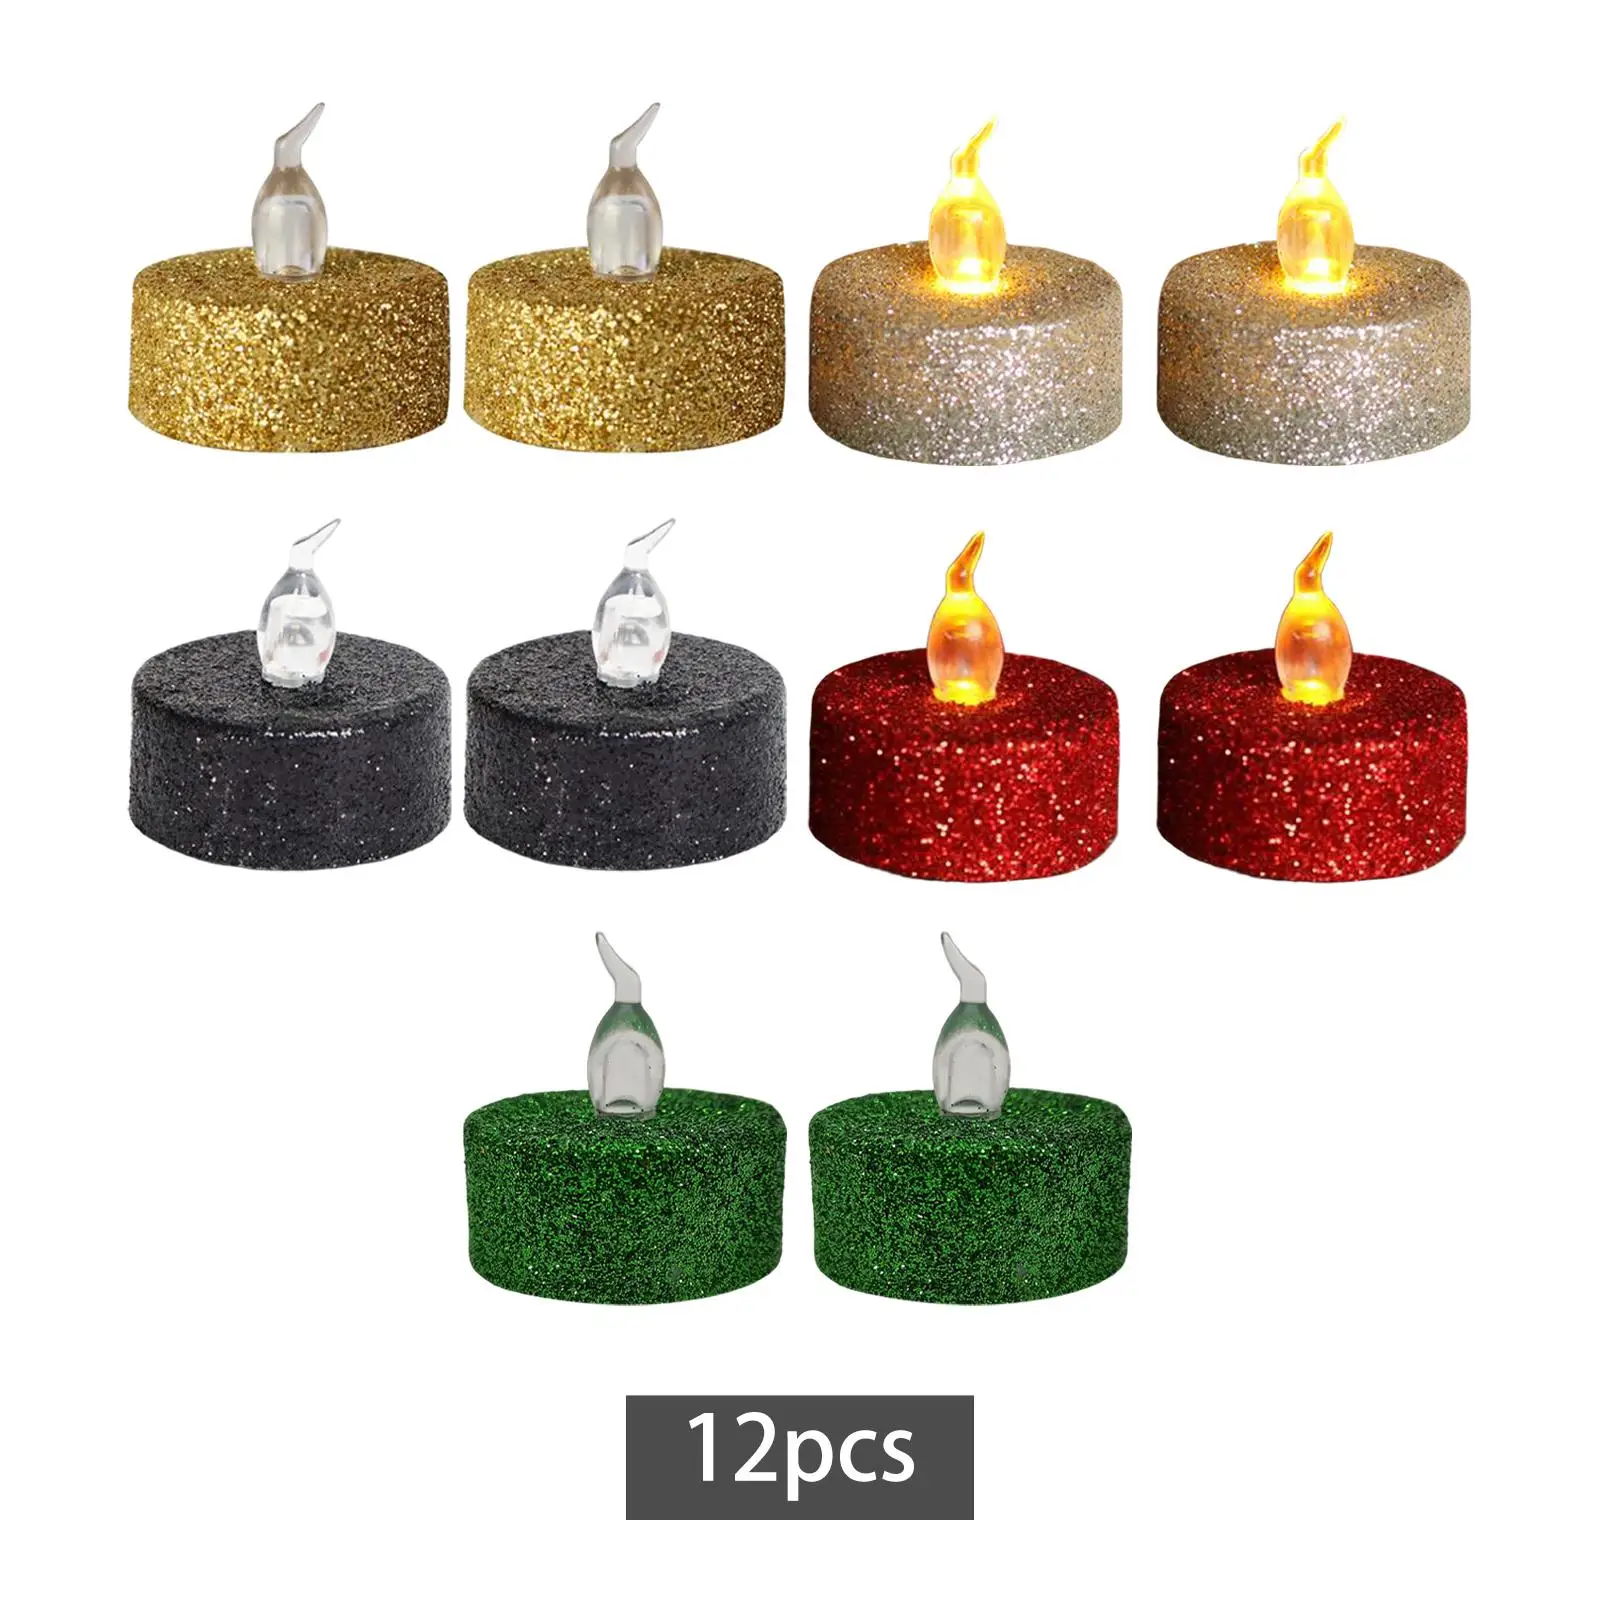 

12Pcs Glitter Battery Tea Lights Flameless Candles Flickering LED Tealights for Outdoor Holiday Halloween Wedding Anniversary